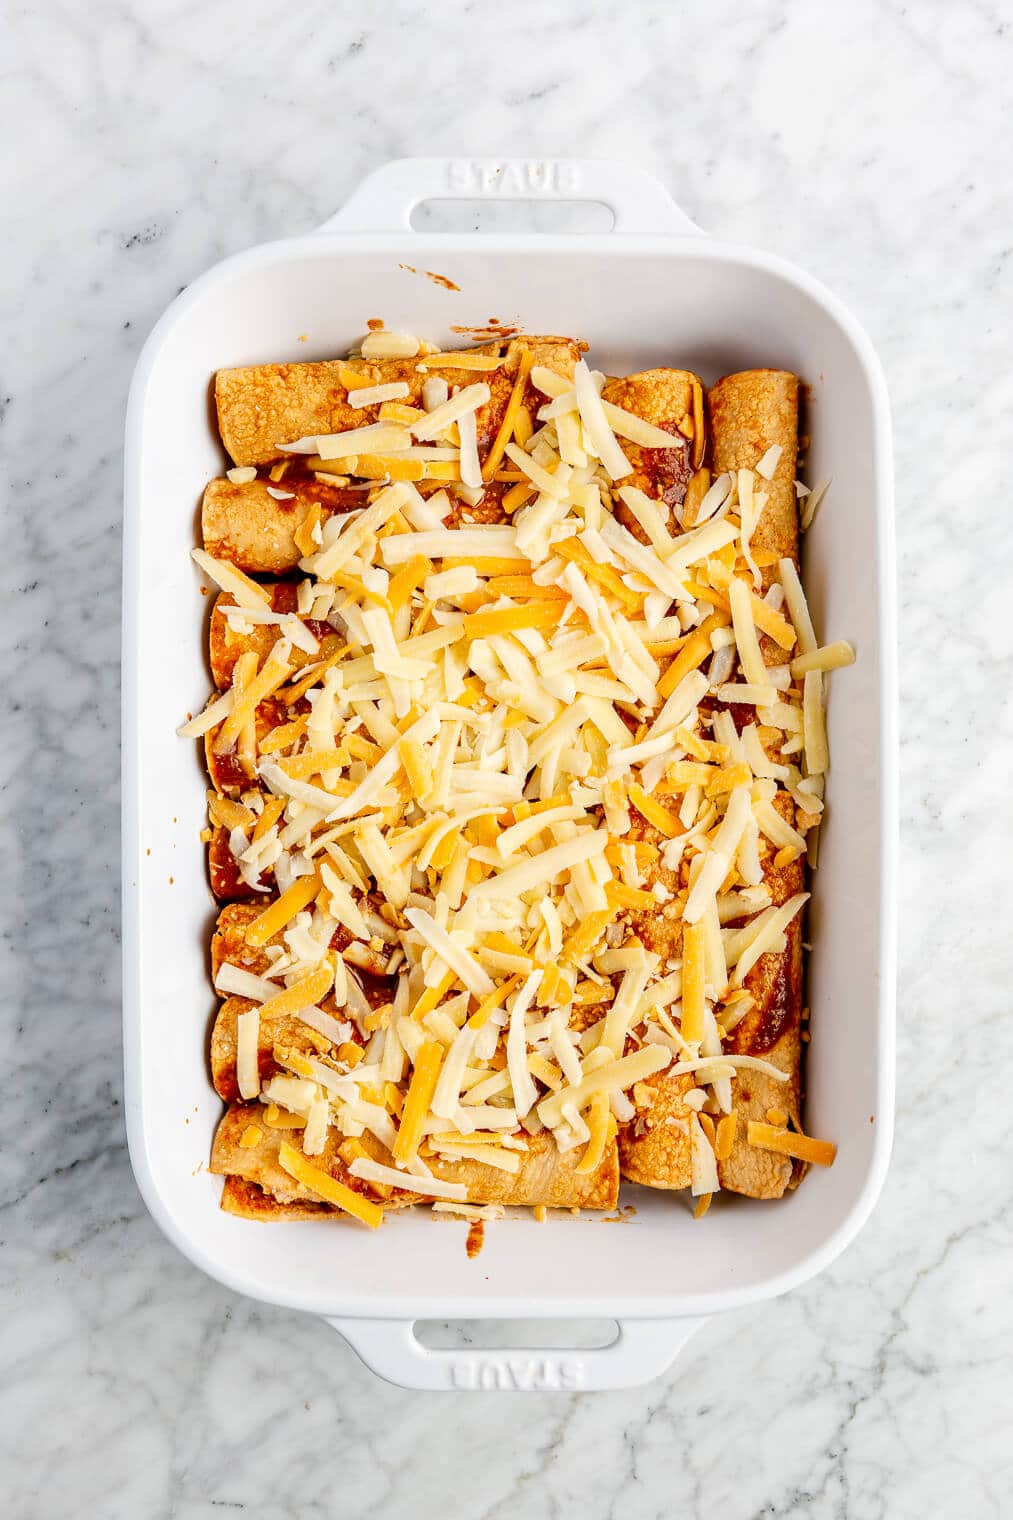 12 enchiladas topped with enchilada sauce and cheese lined up in a casserole dish before going into the oven.